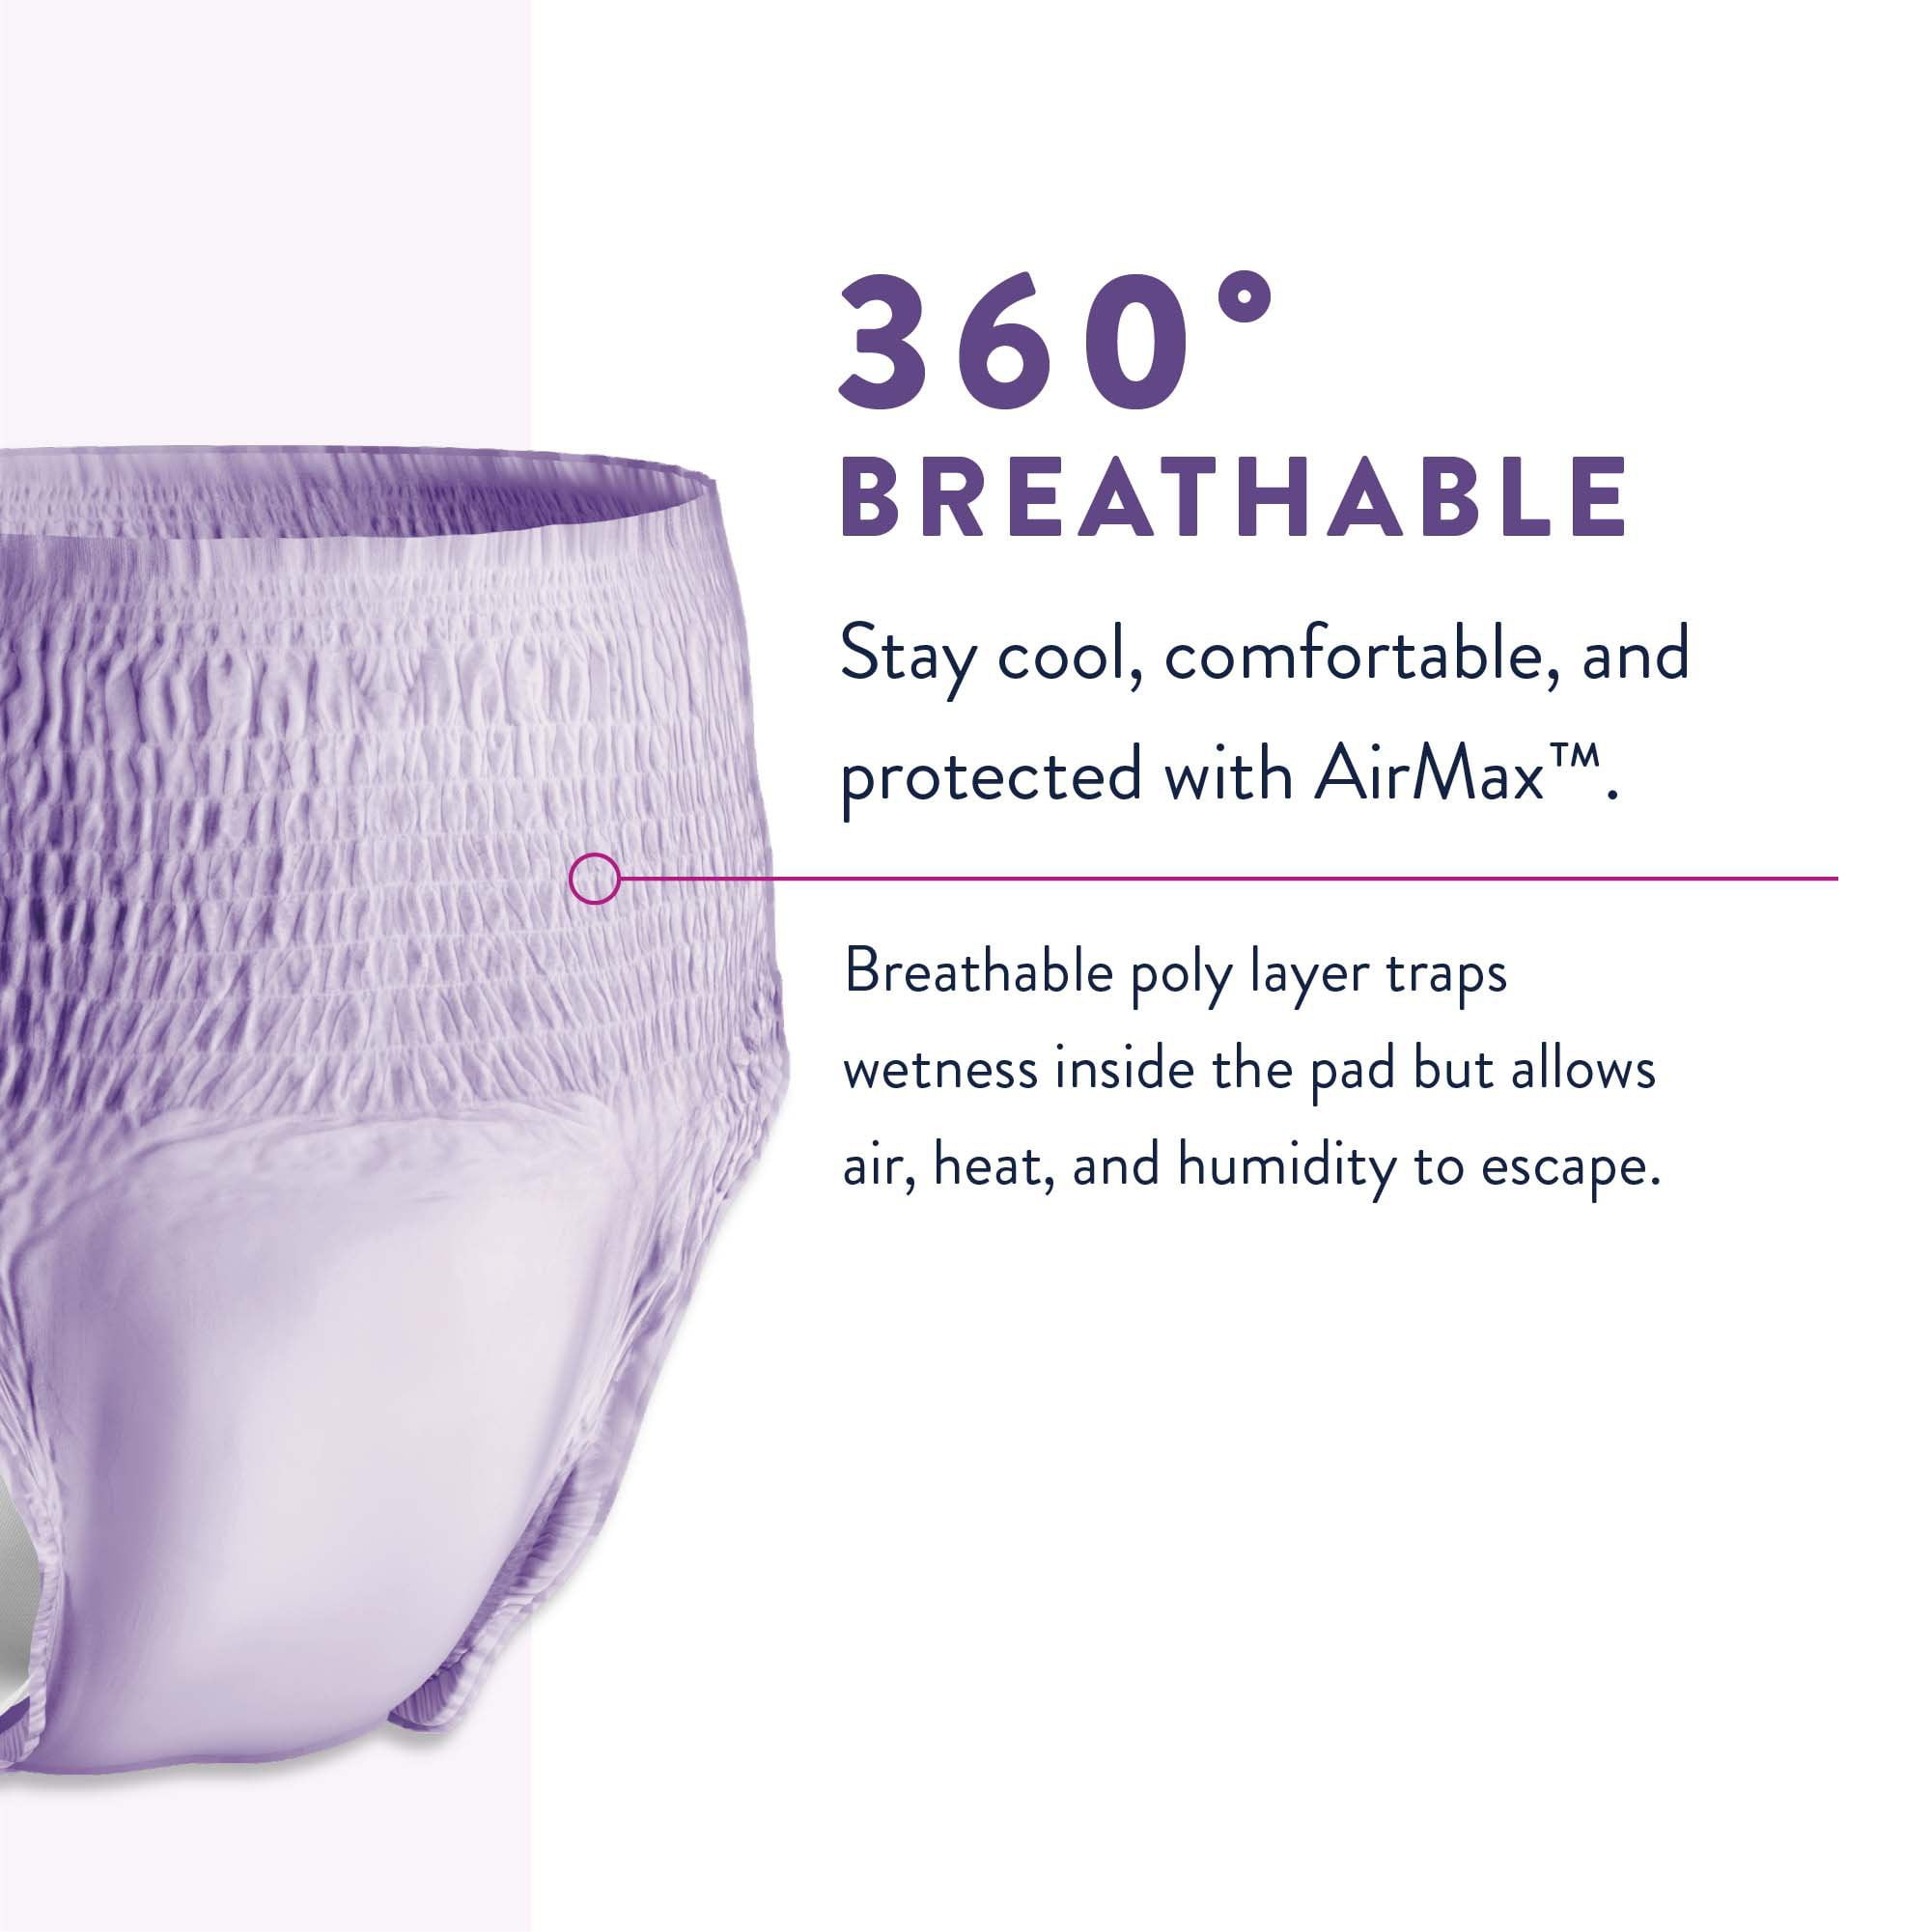 Prevail Per-Fit Daily Underwear for Women, Incontinence